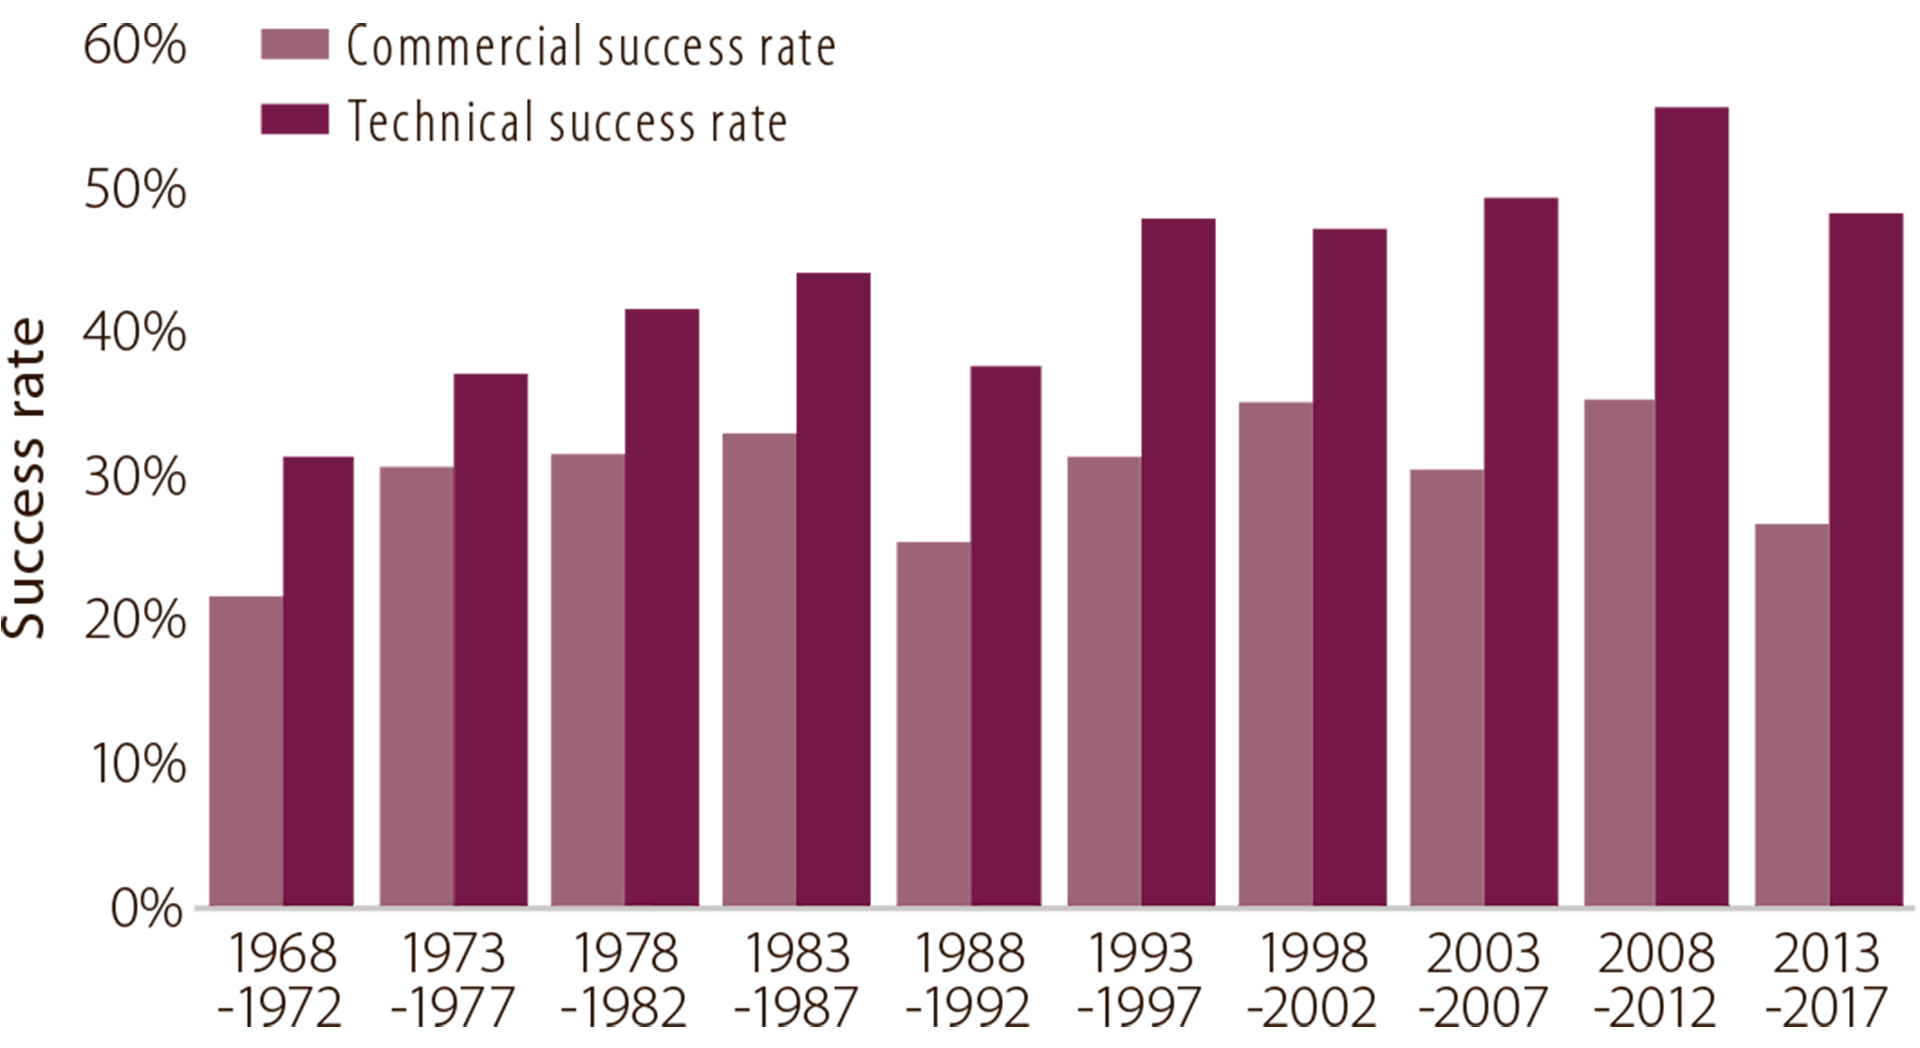 Figure 6.2 Development of technical and commercial success rates (averages at five-year intervals).